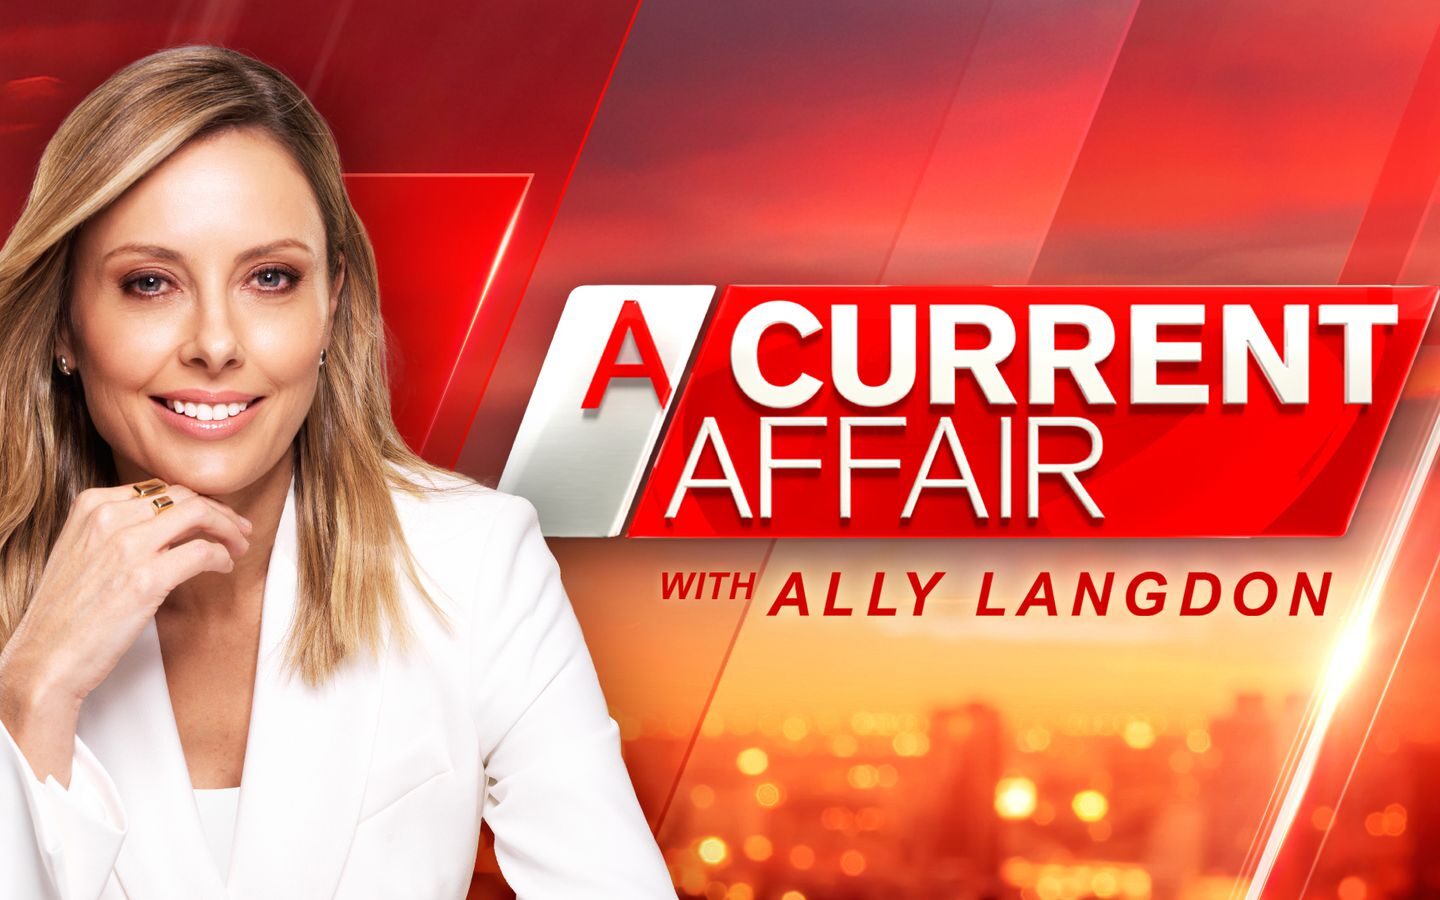 A Current Affair on Channel 9